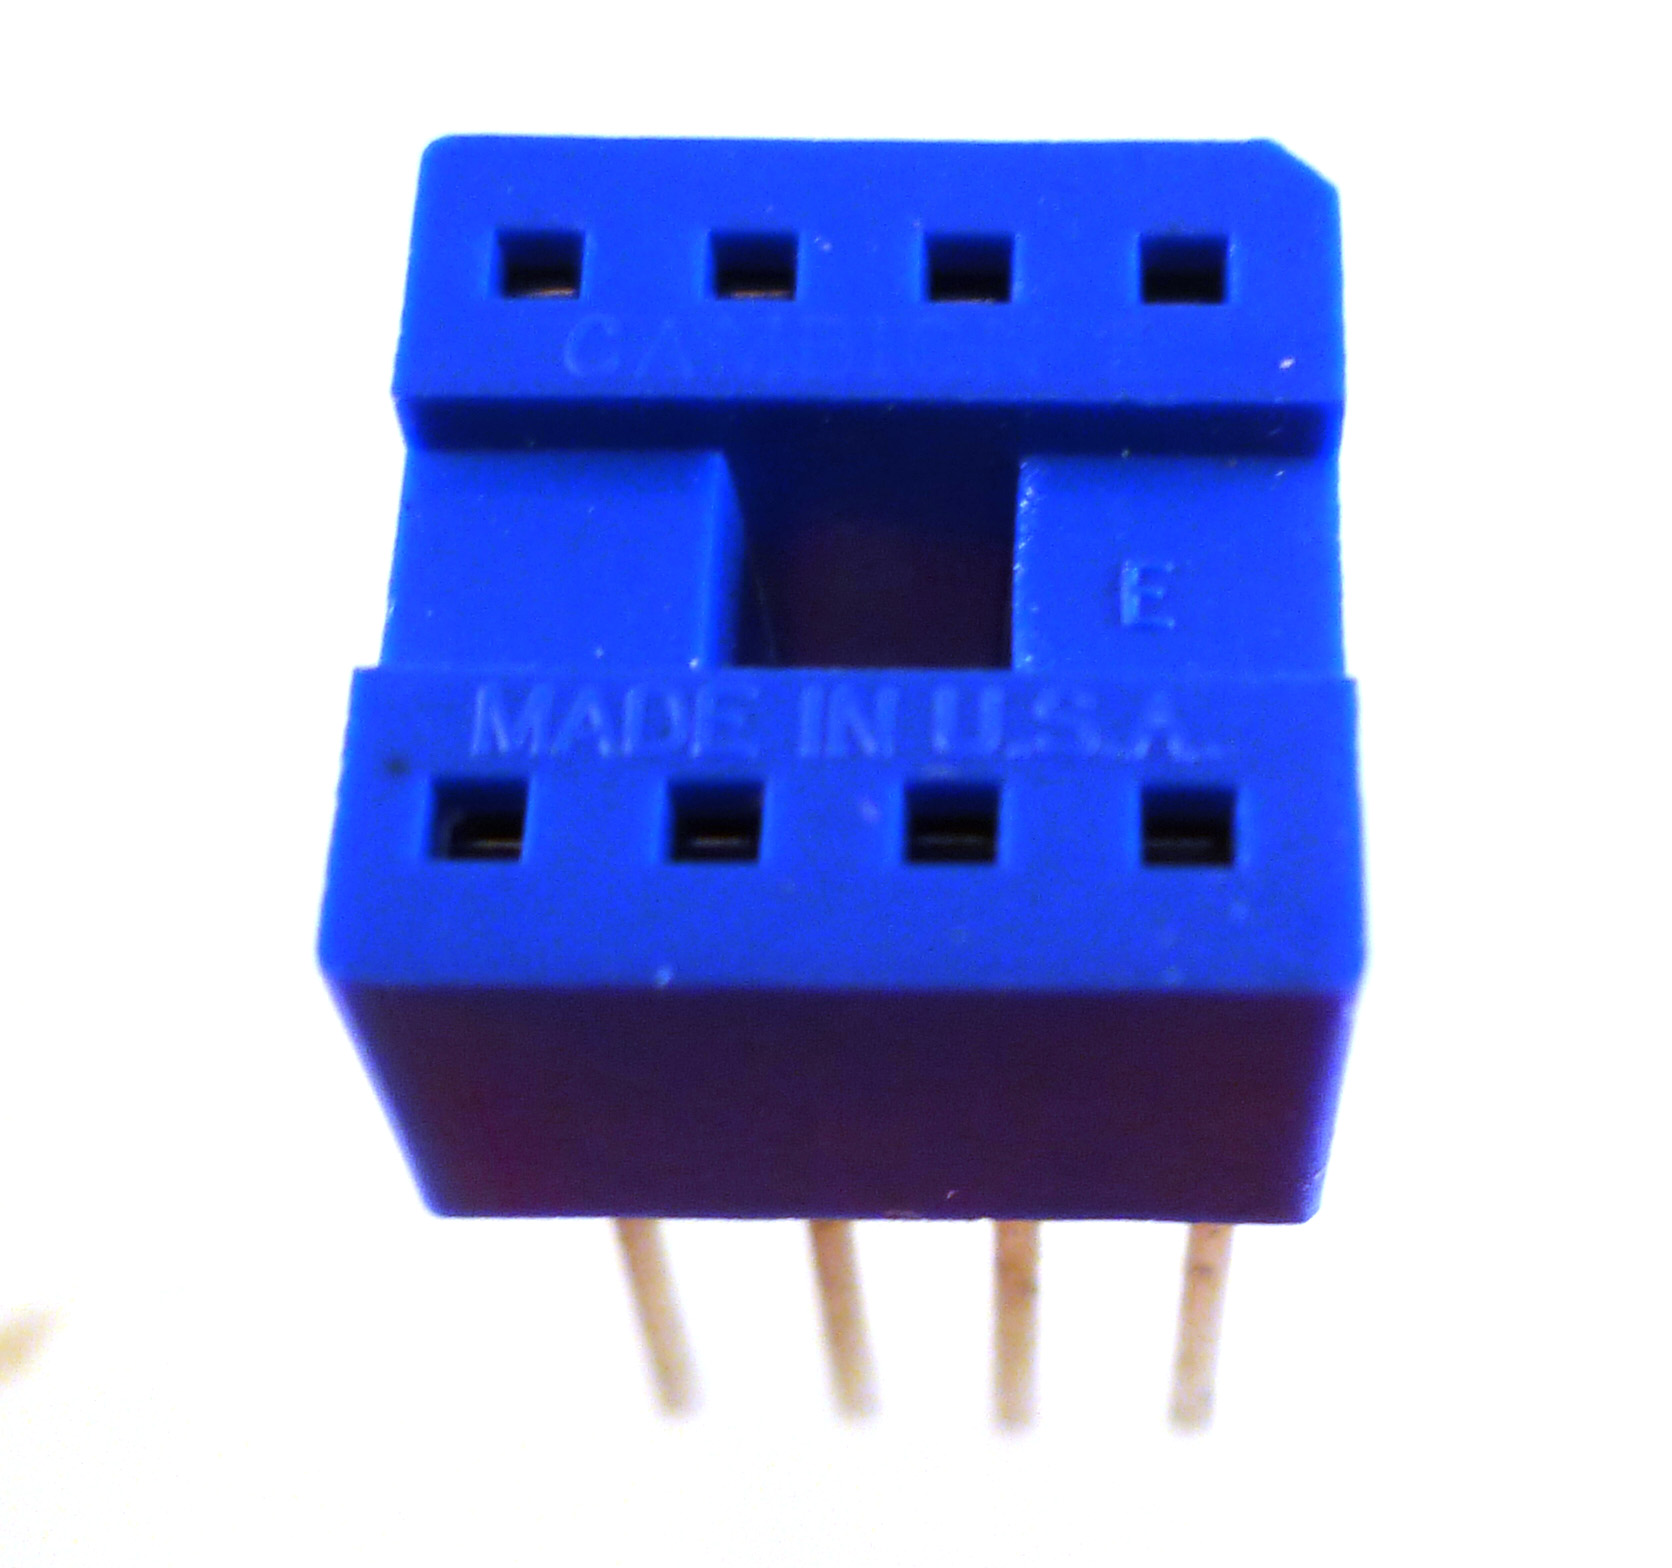 Cambion DIL Wire Wrap IC Socket 8 Pin 0.3in Width Blue MBD003I 